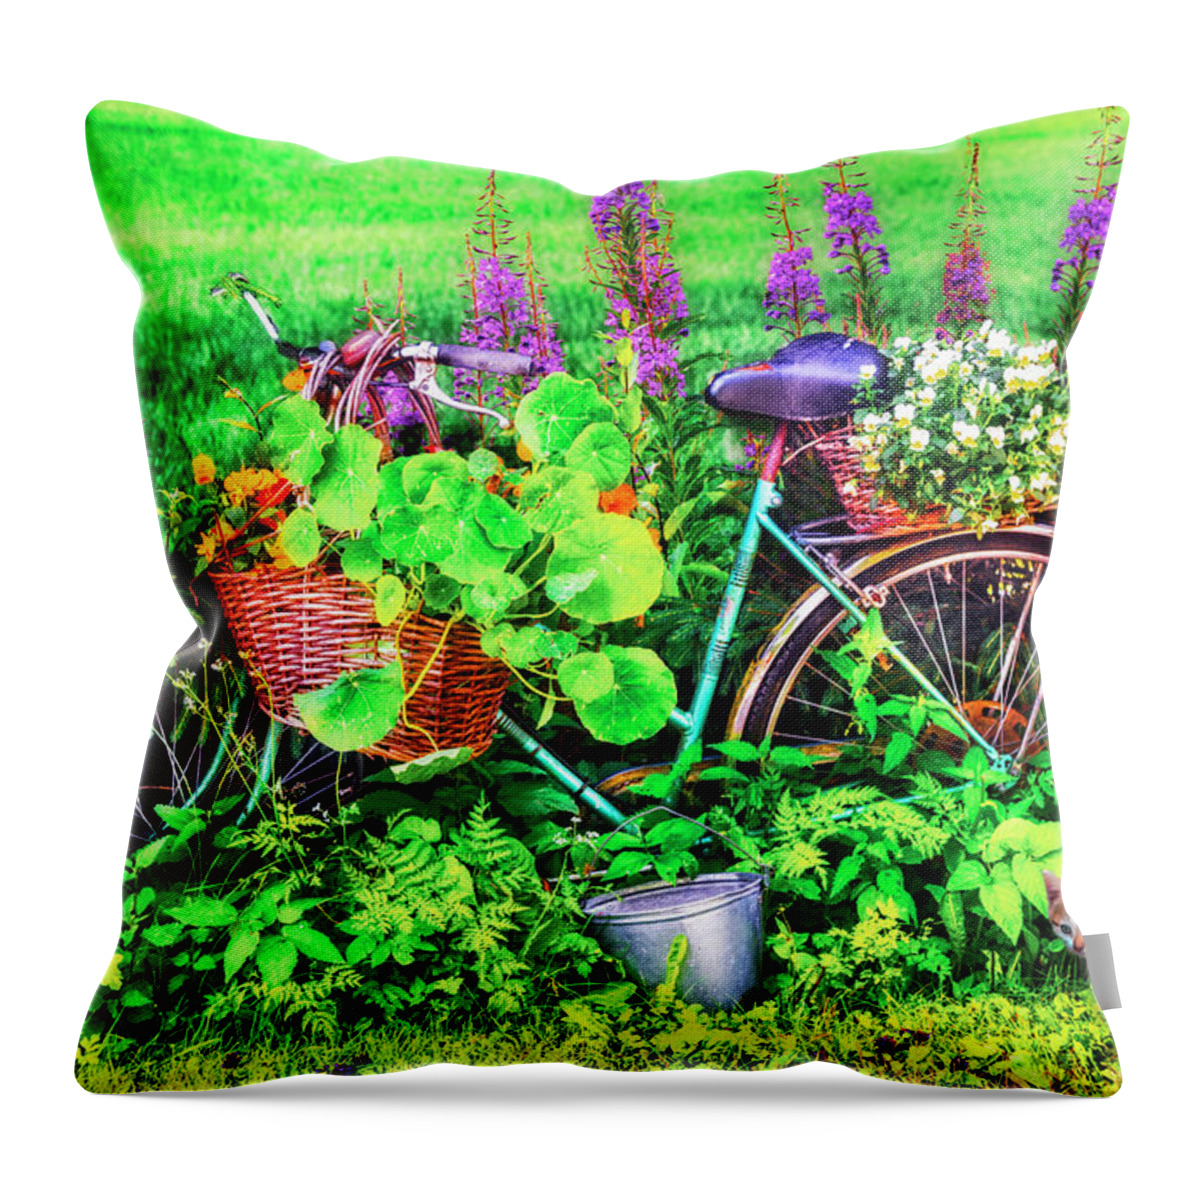 Appalachia Throw Pillow featuring the photograph Bicycle in the Flower Garden by Debra and Dave Vanderlaan